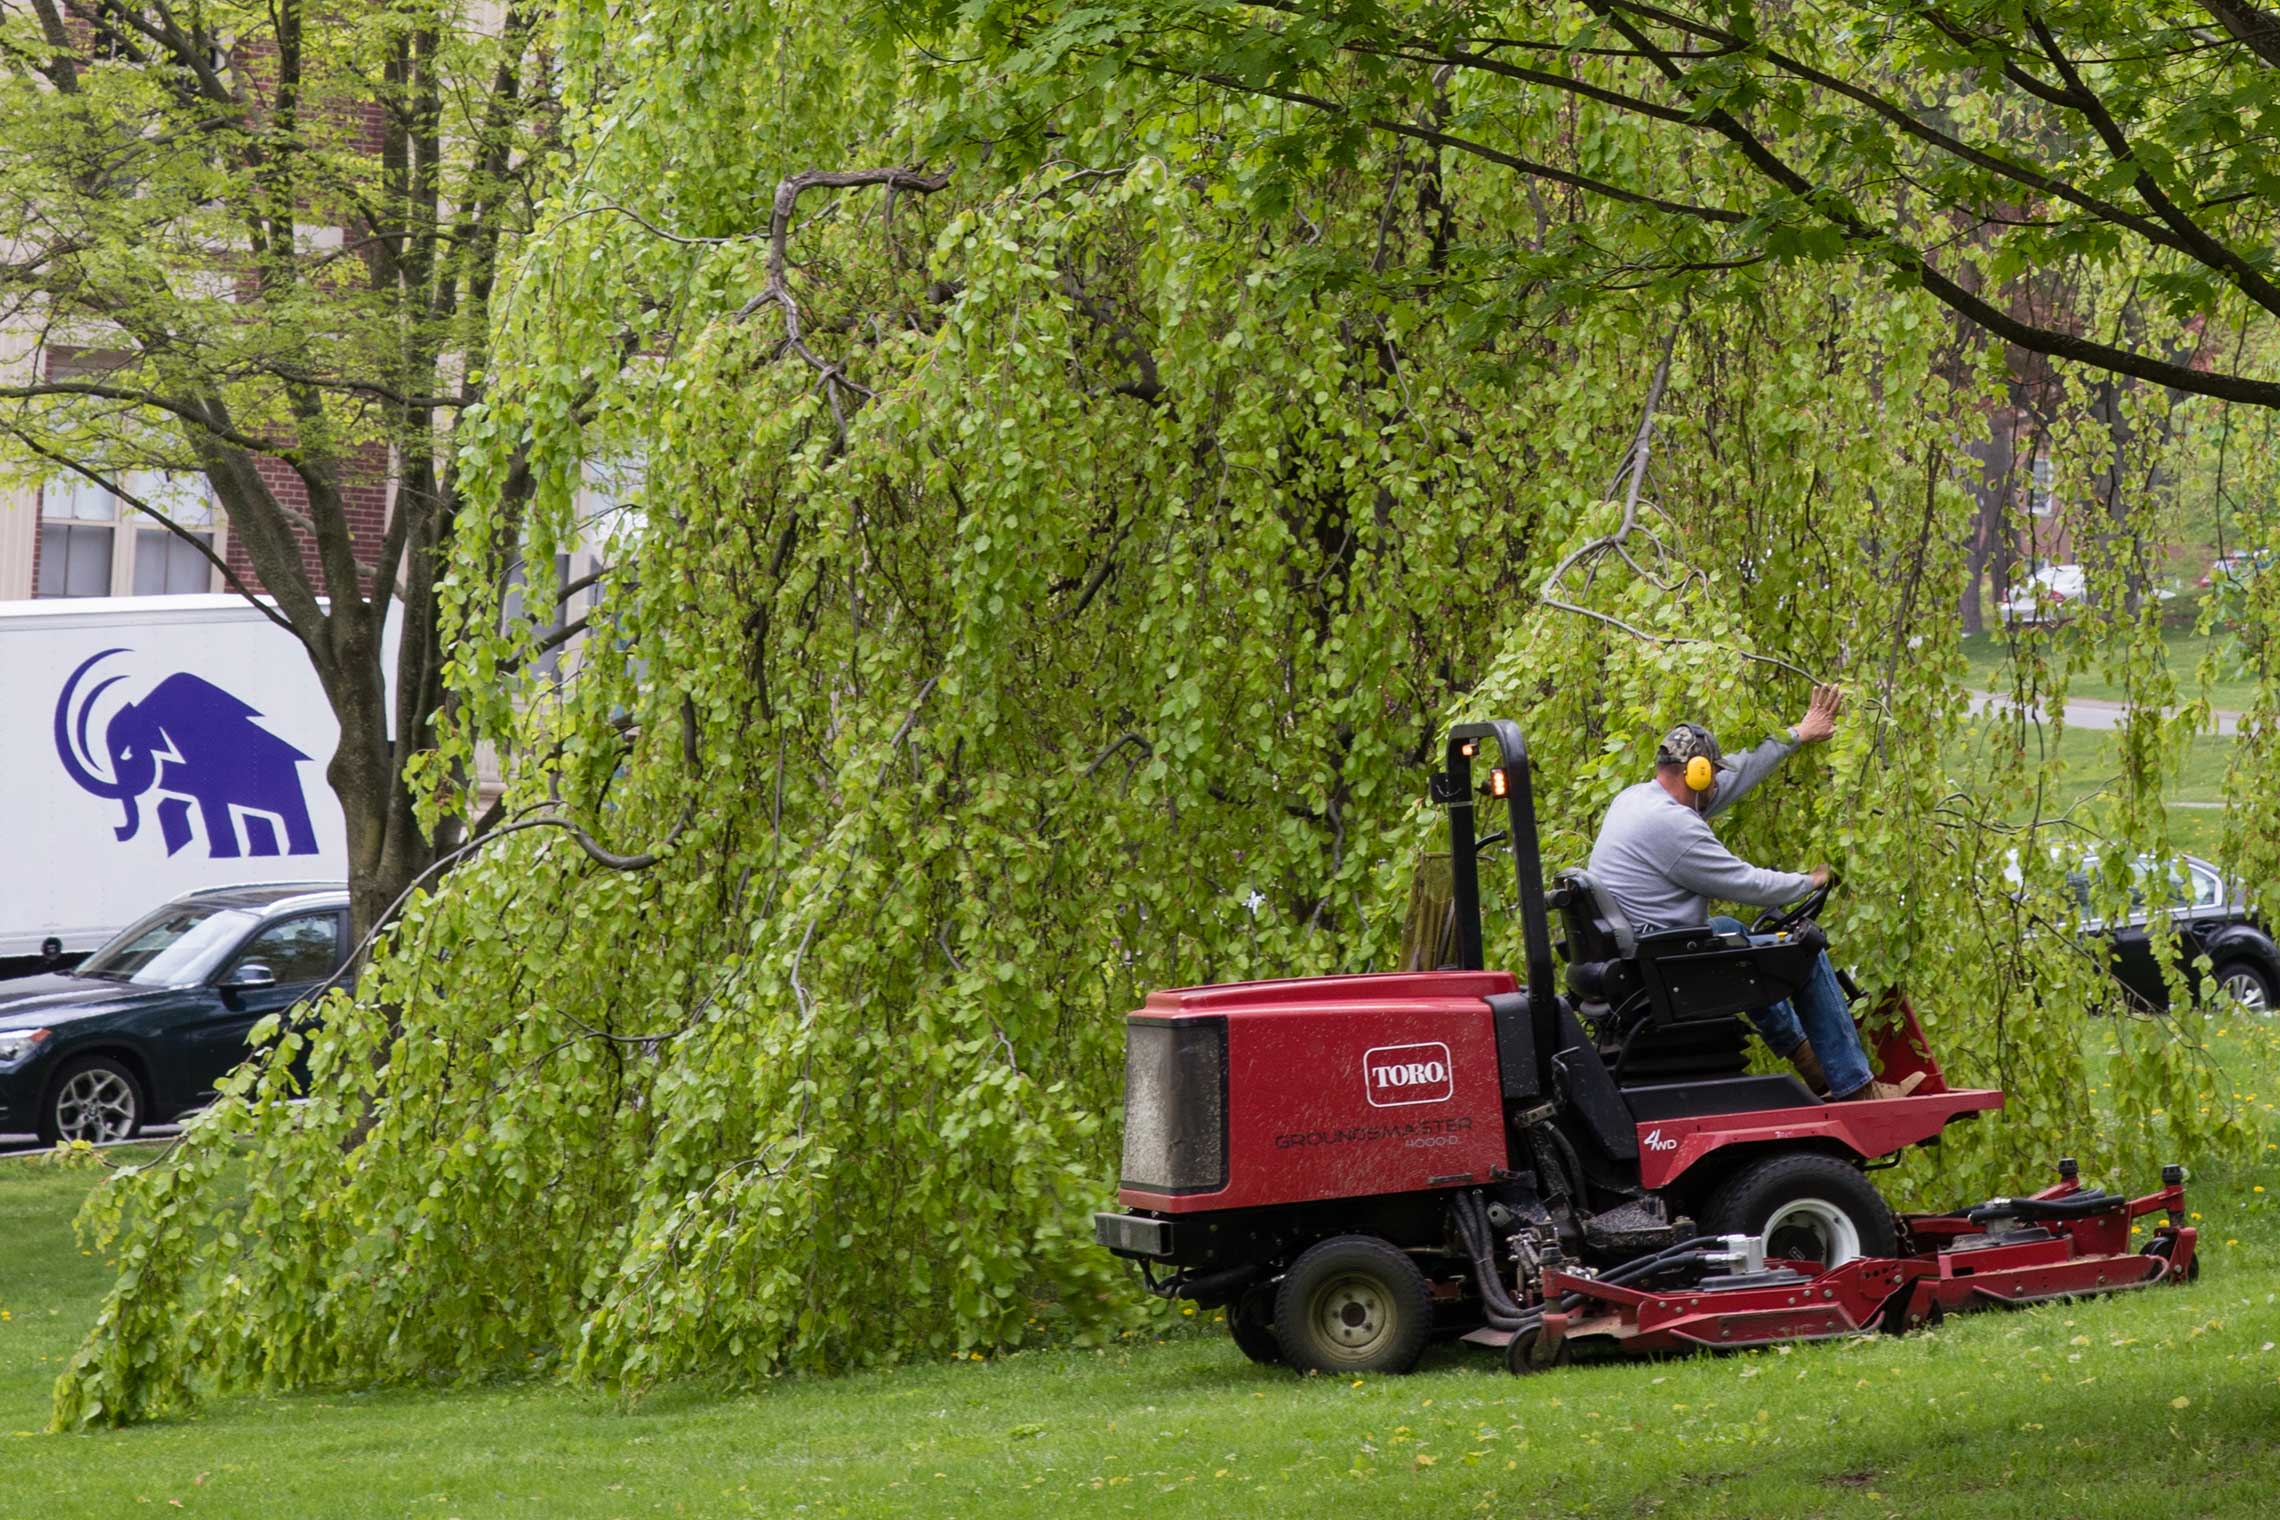 Mowing the grass on the Amherst College campus